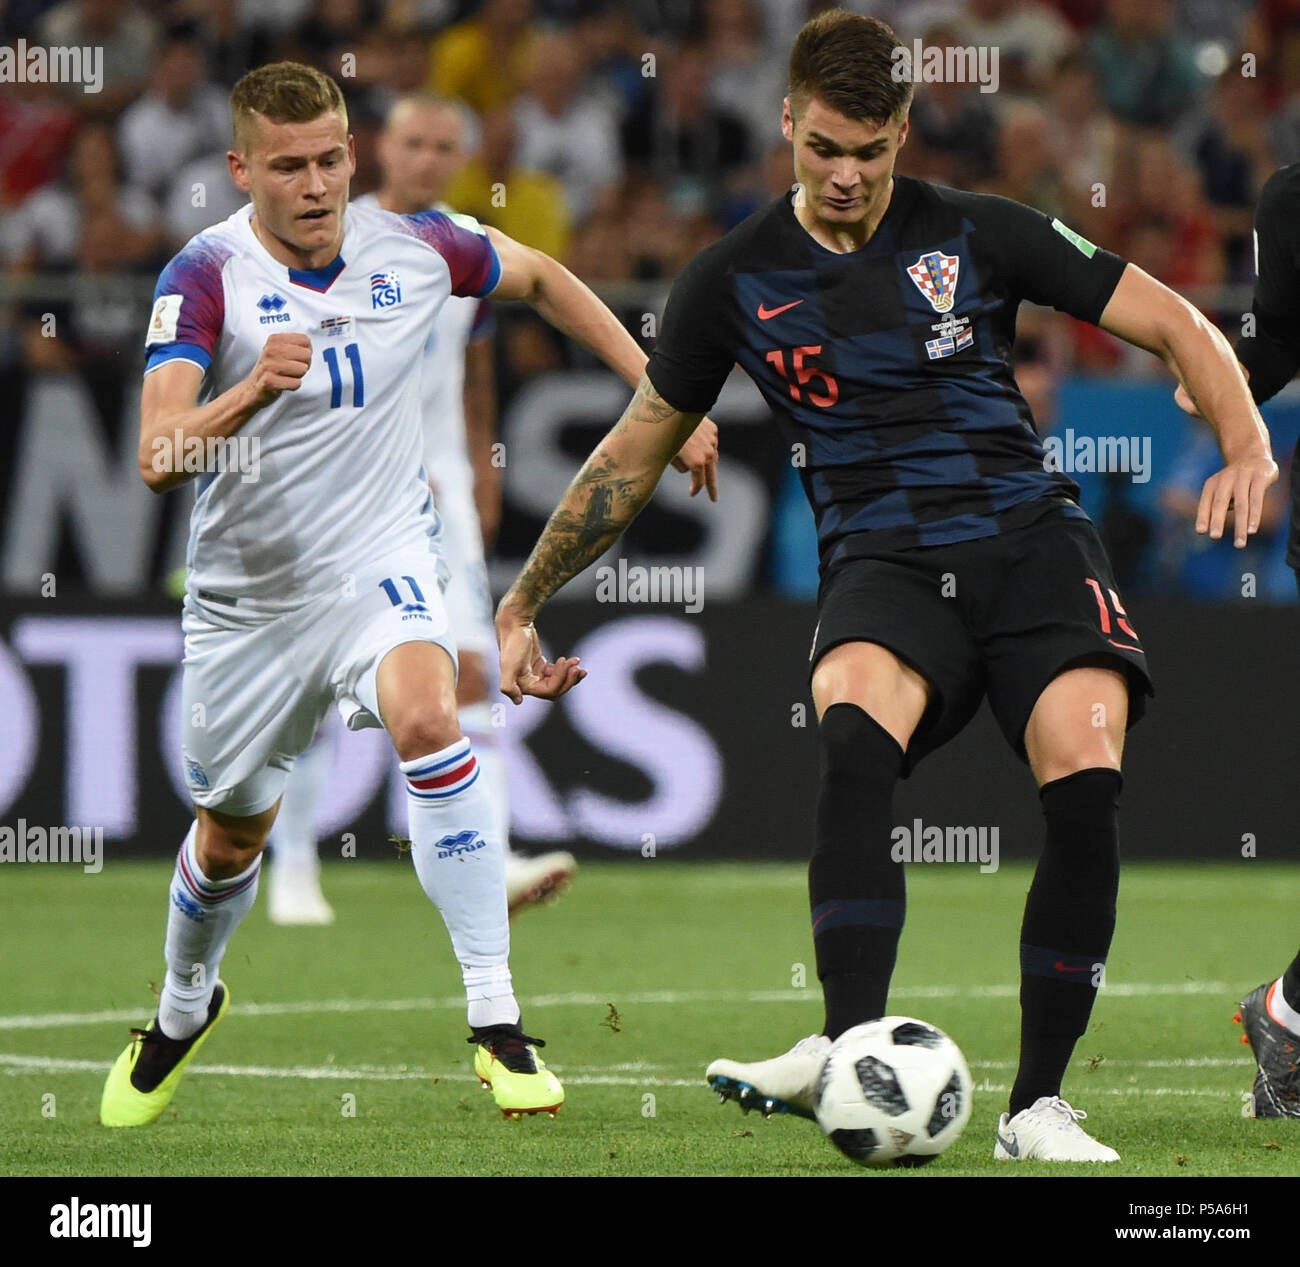 Rostov On Don. 26th June, 2018. Duje Caleta-Car (R) of Croatia competes during the 2018 FIFA World Cup Group D match between Iceland and Croatia in Rostov-on-Don, Russia, June 26, 2018. Credit: He Canling/Xinhua/Alamy Live News Stock Photo